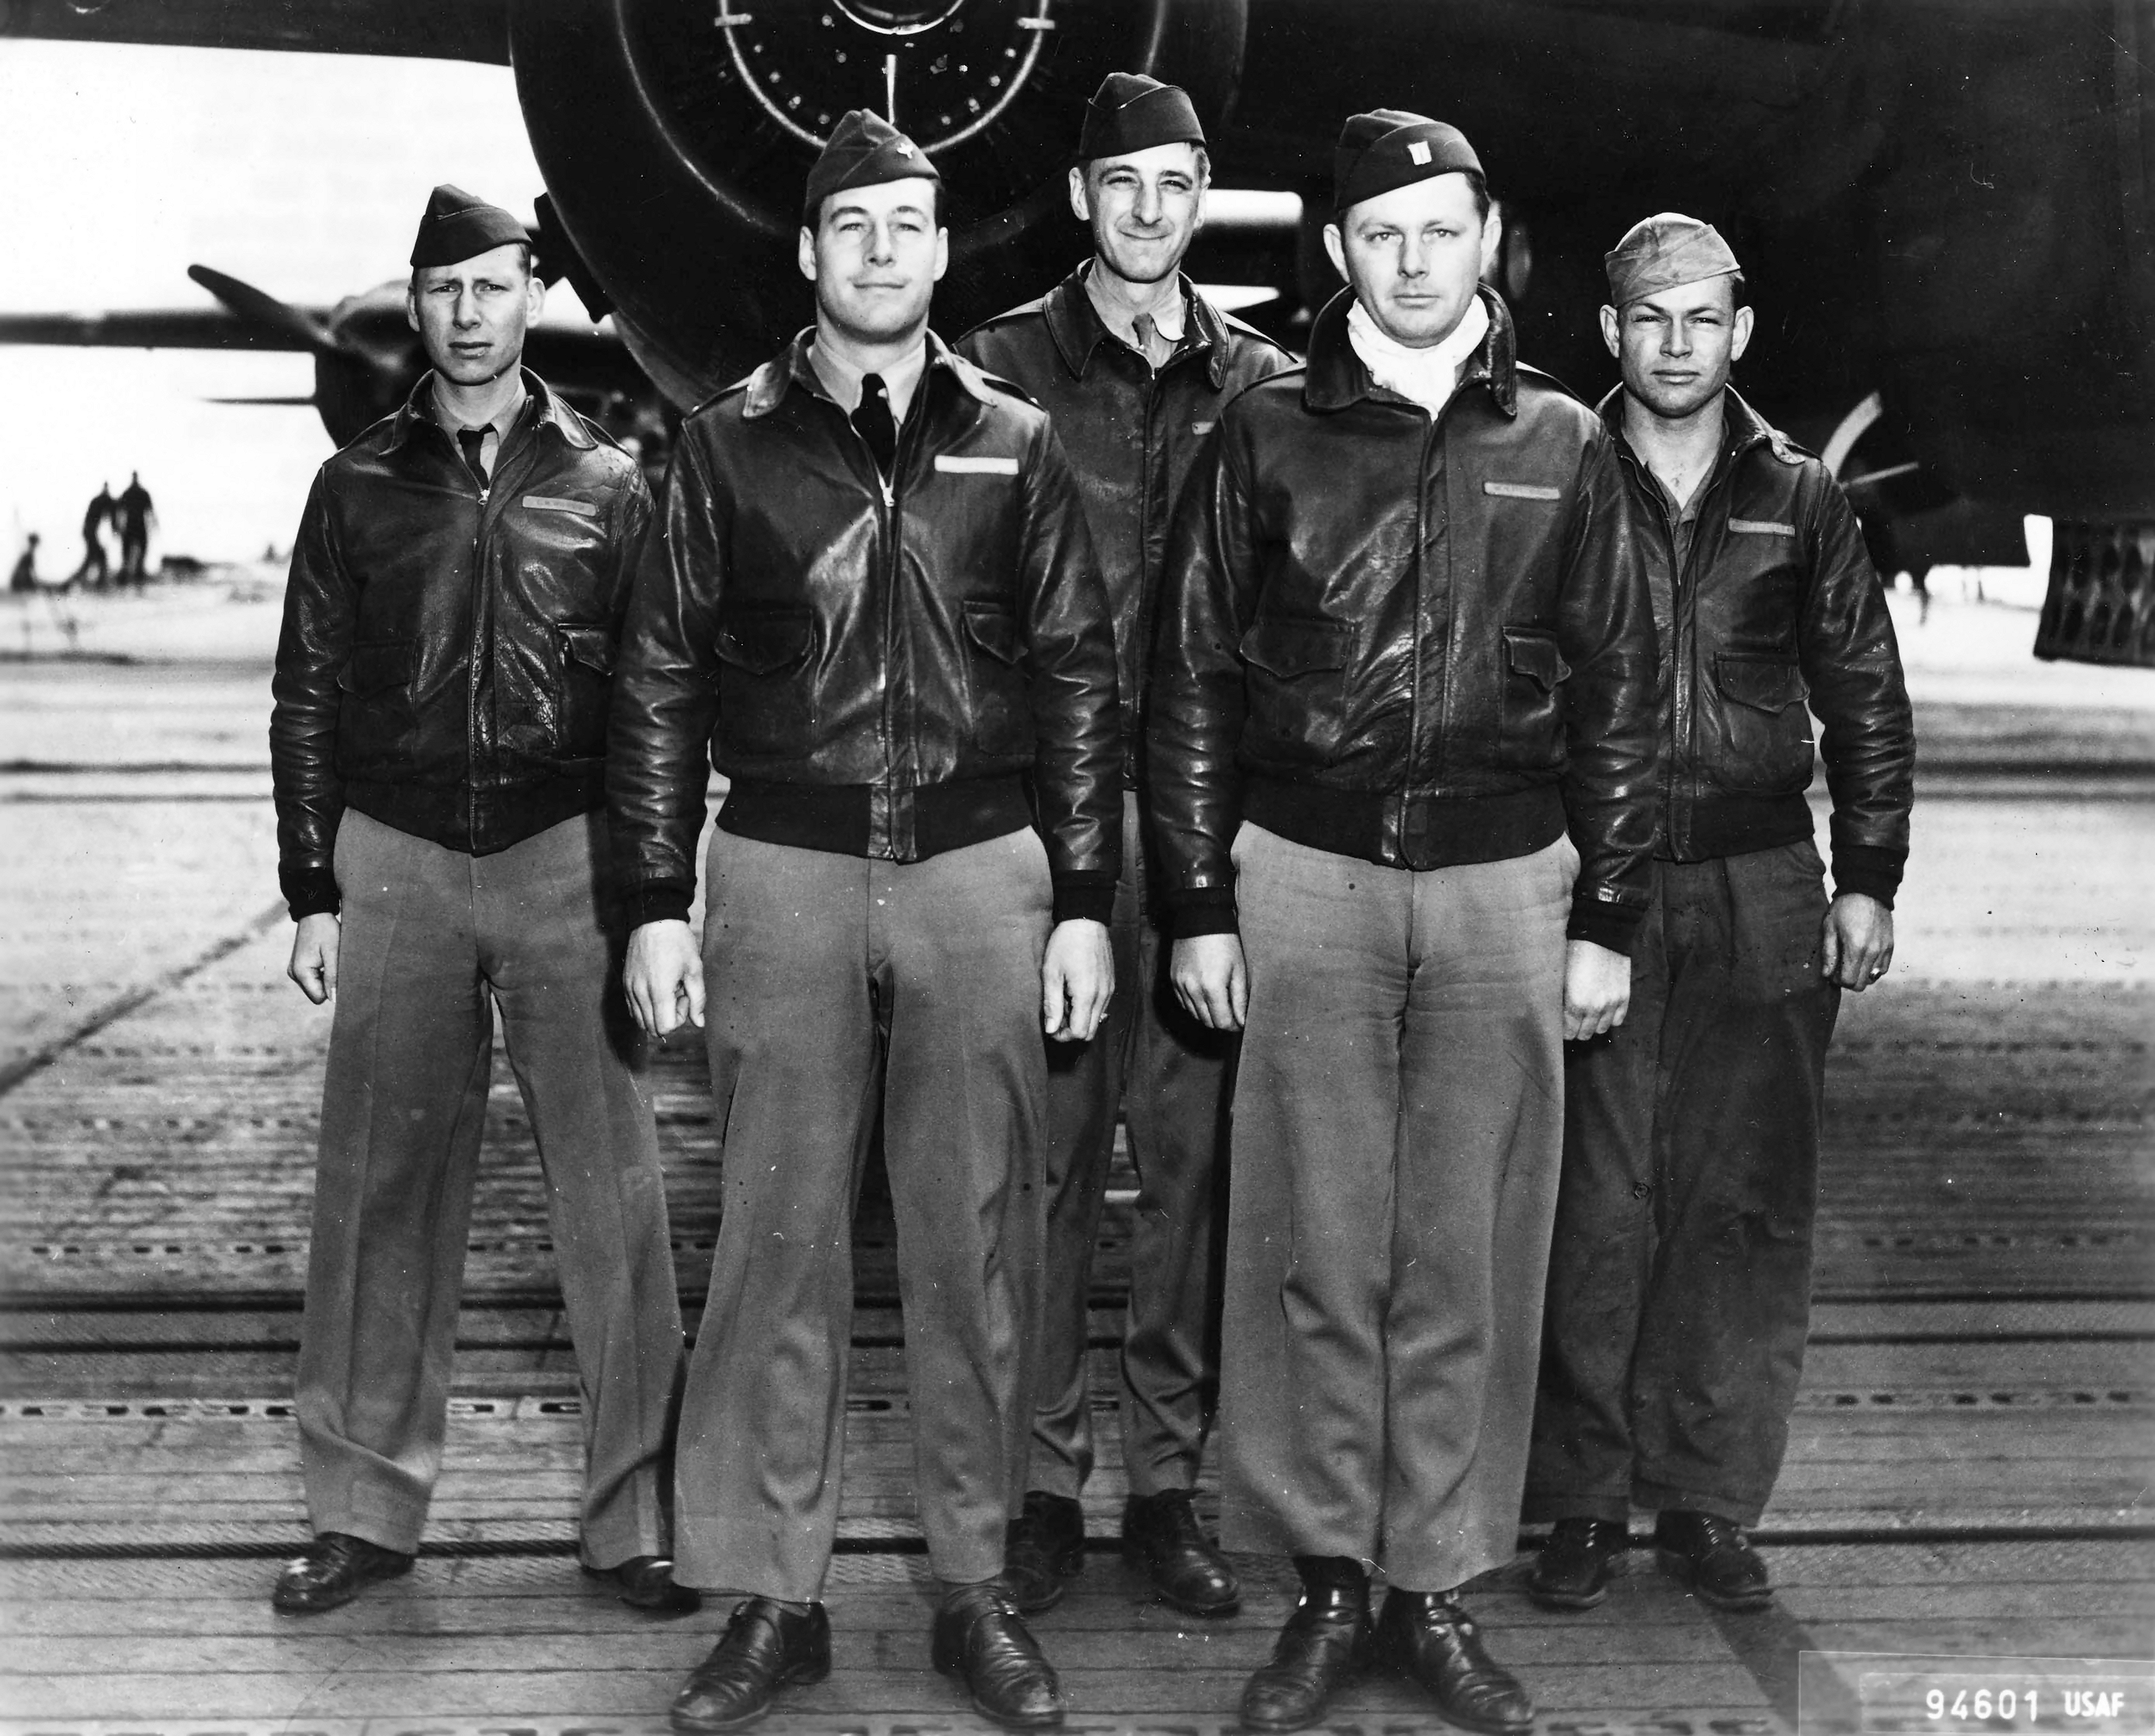 One of the Doolittle Raid B-25 bomber crews aboard USS Hornet shortly before the mission, Apr 1942